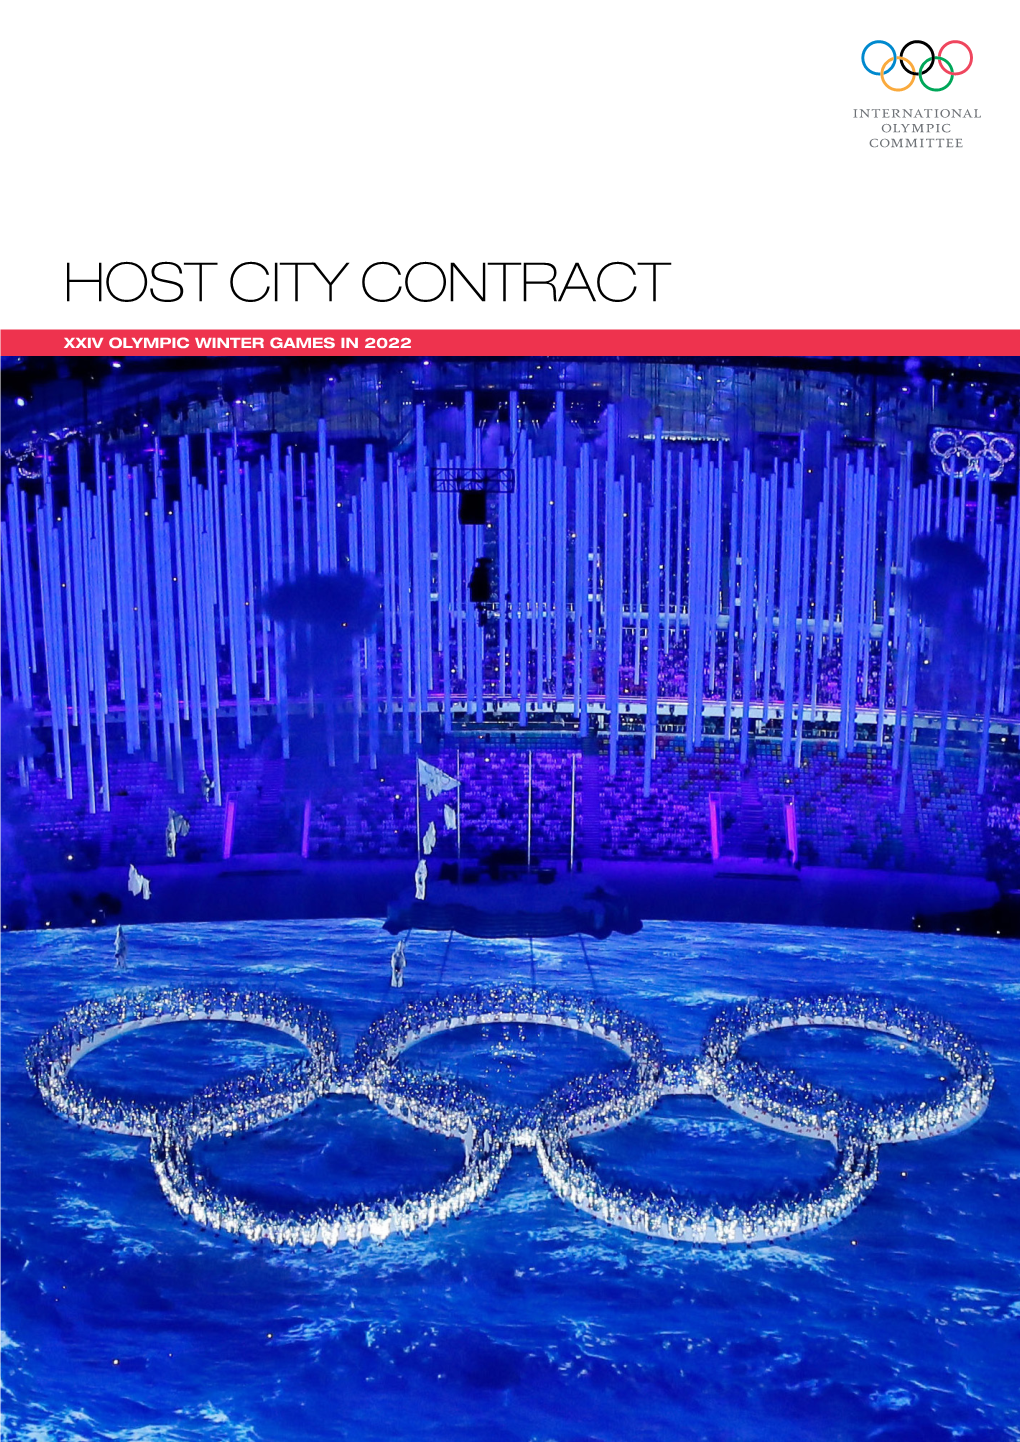 Host City Contract for the XXIV Olympic Winter Games in 2022